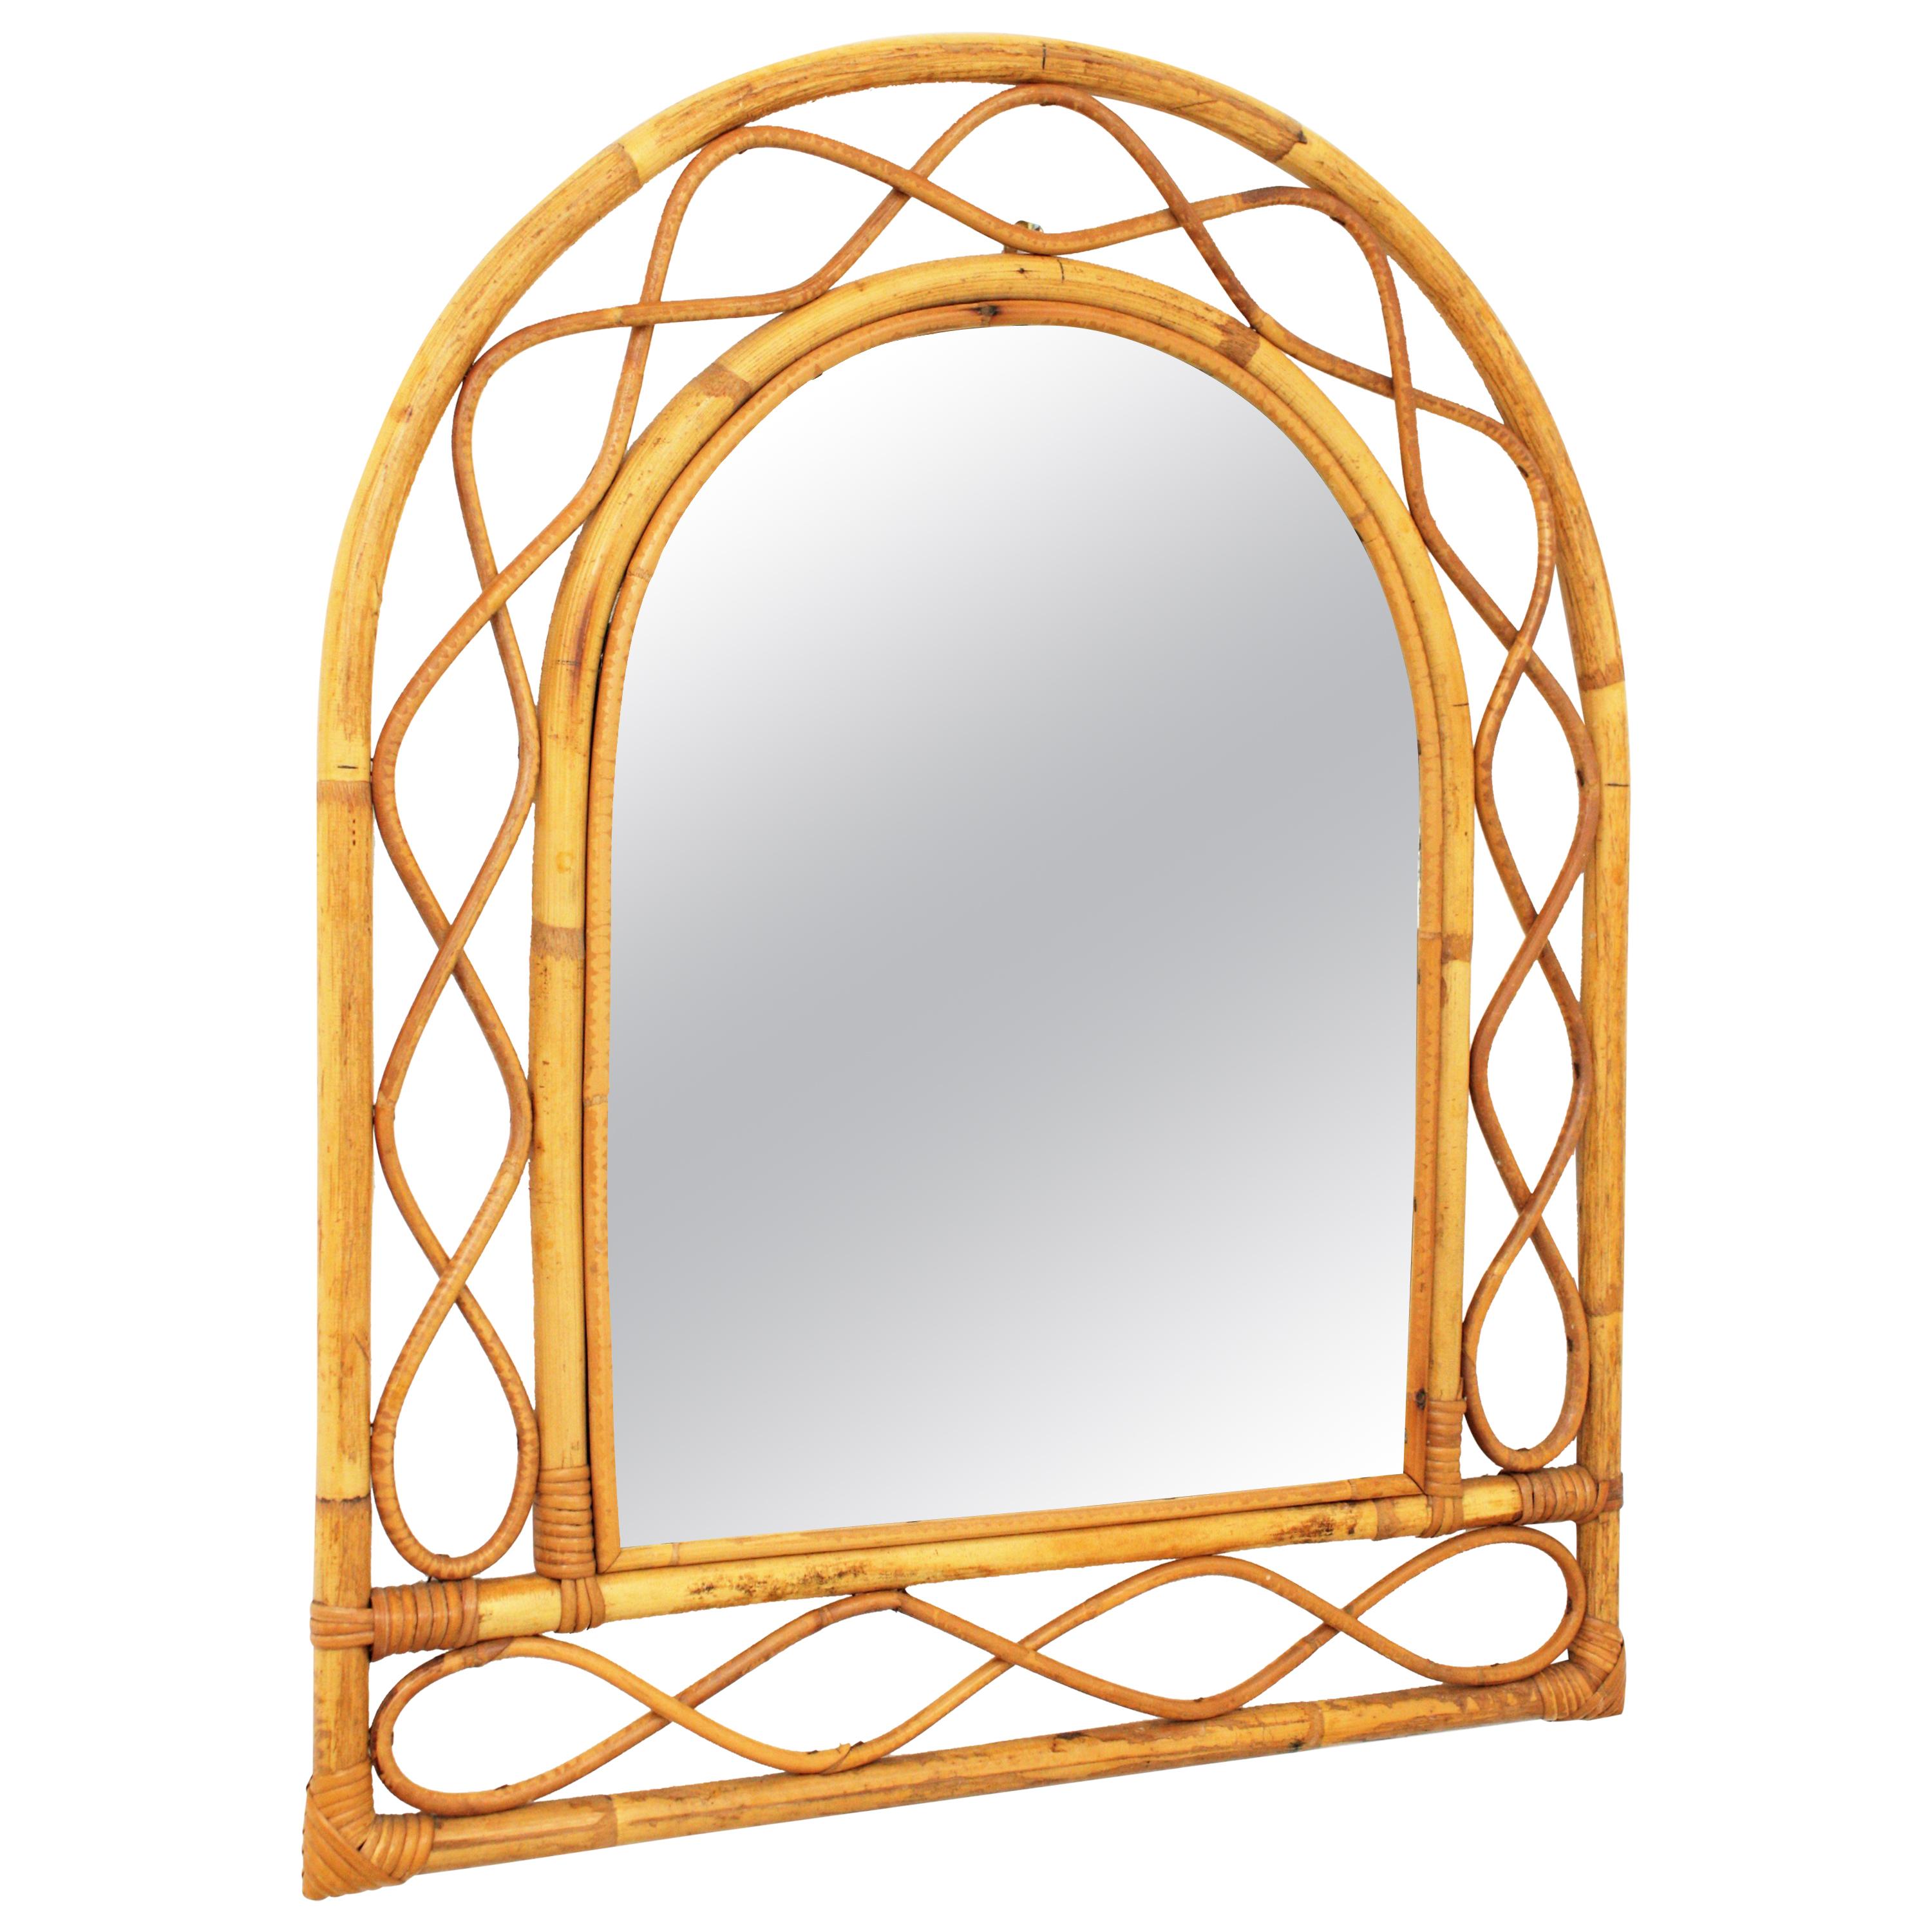 Lovely Mid-Century Modern Franco Albini style handcrafted bamboo and rattan mirror with arched top.
This mirror features a double bamboo frame with decorative rattan undulations between the bamboo canes.
This bamboo mirror will be a nice addition